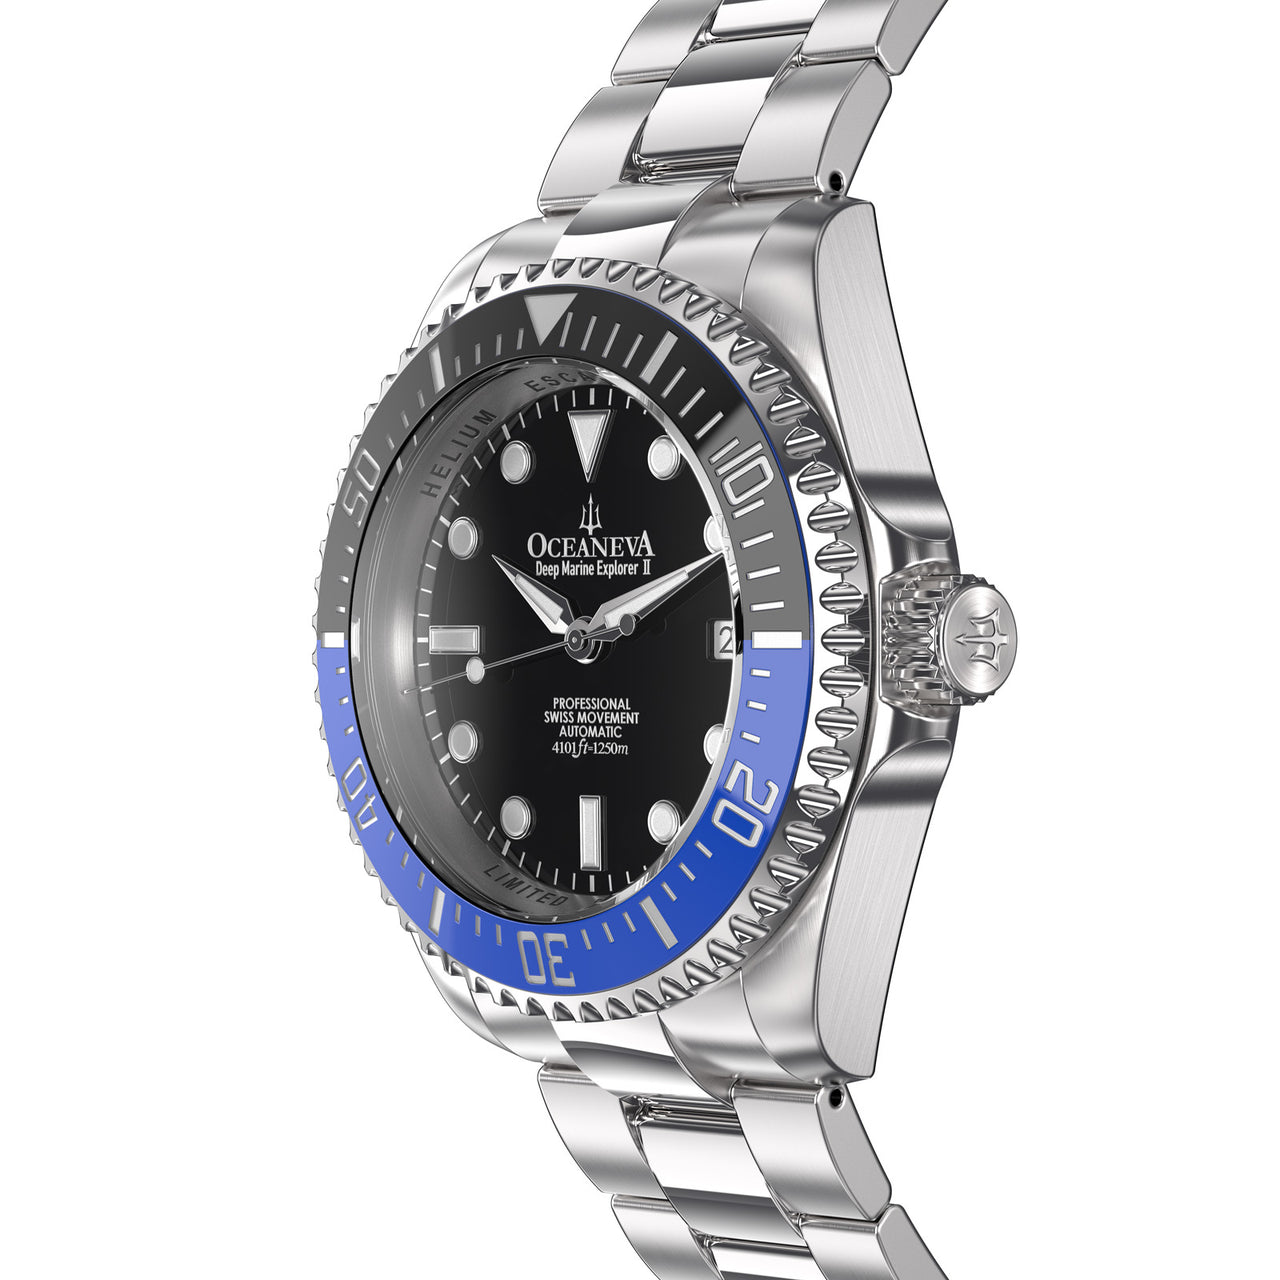 Oceaneva 1250M Dive Watch Blue and Black Side View Crown